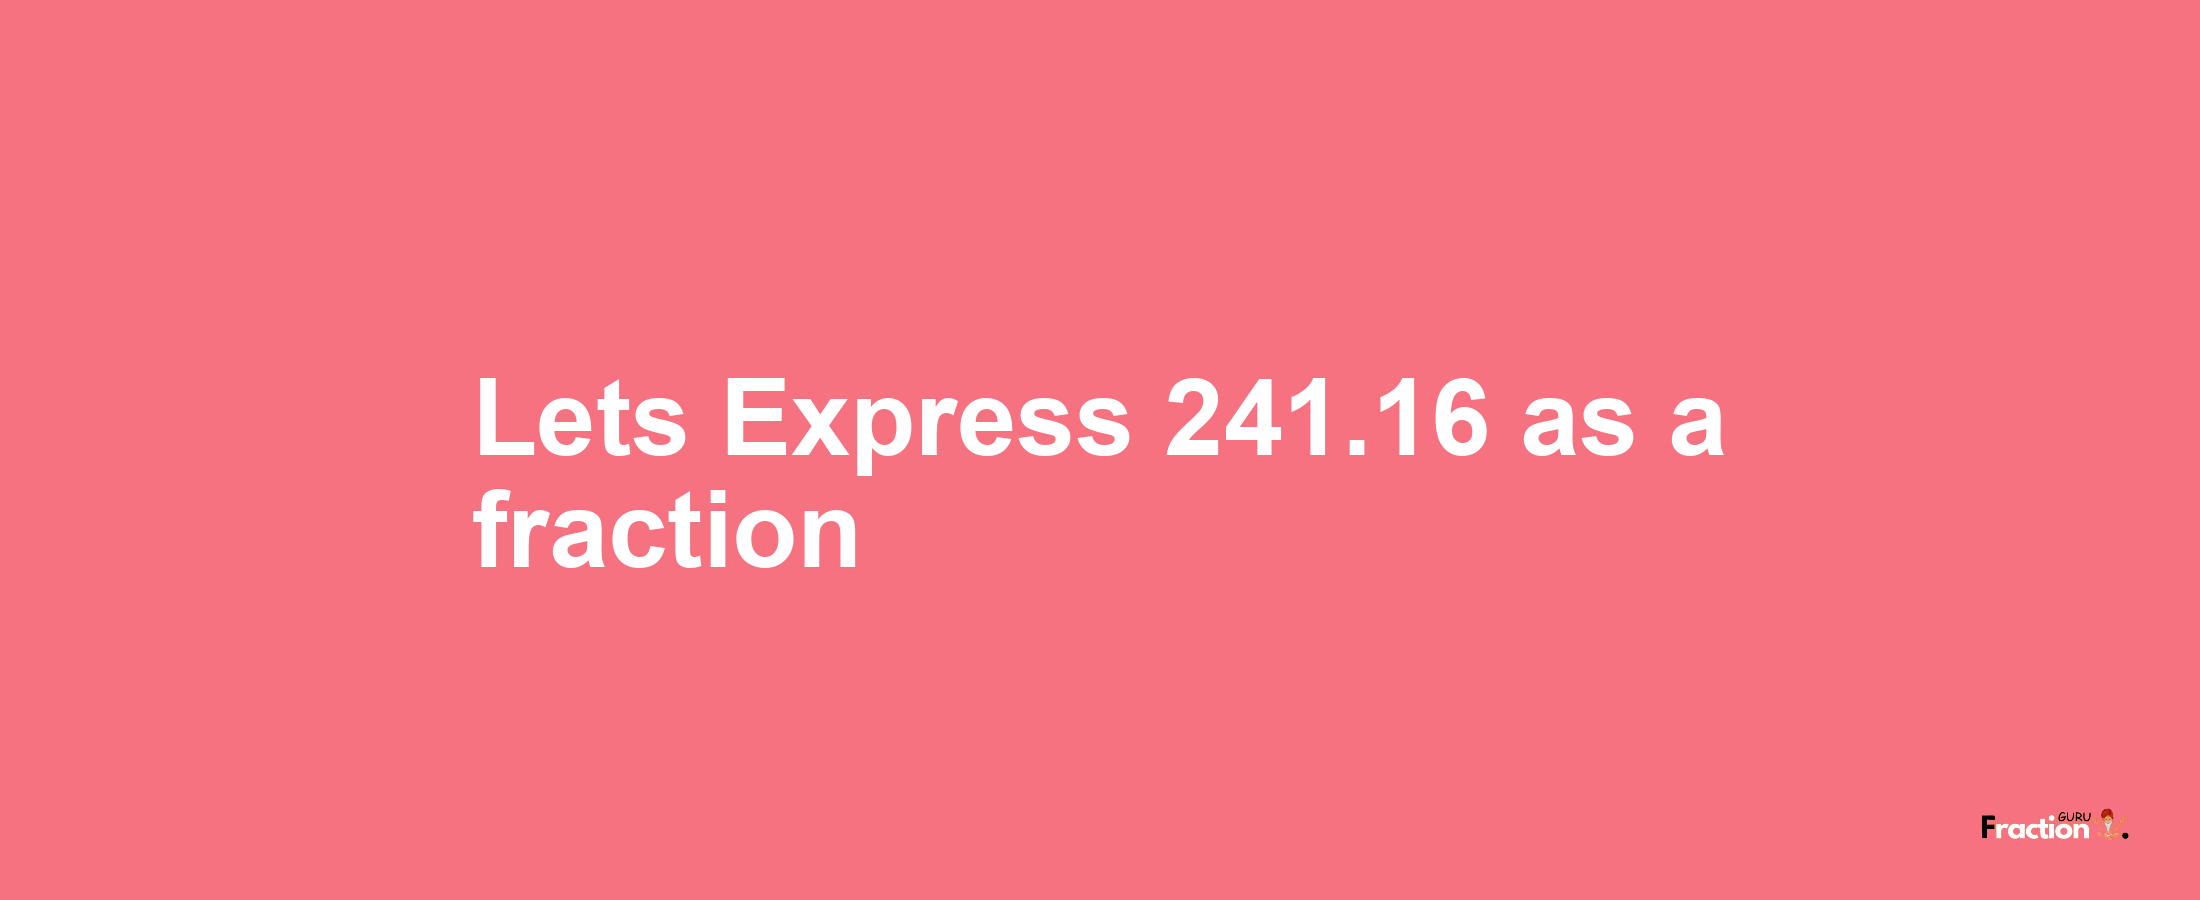 Lets Express 241.16 as afraction